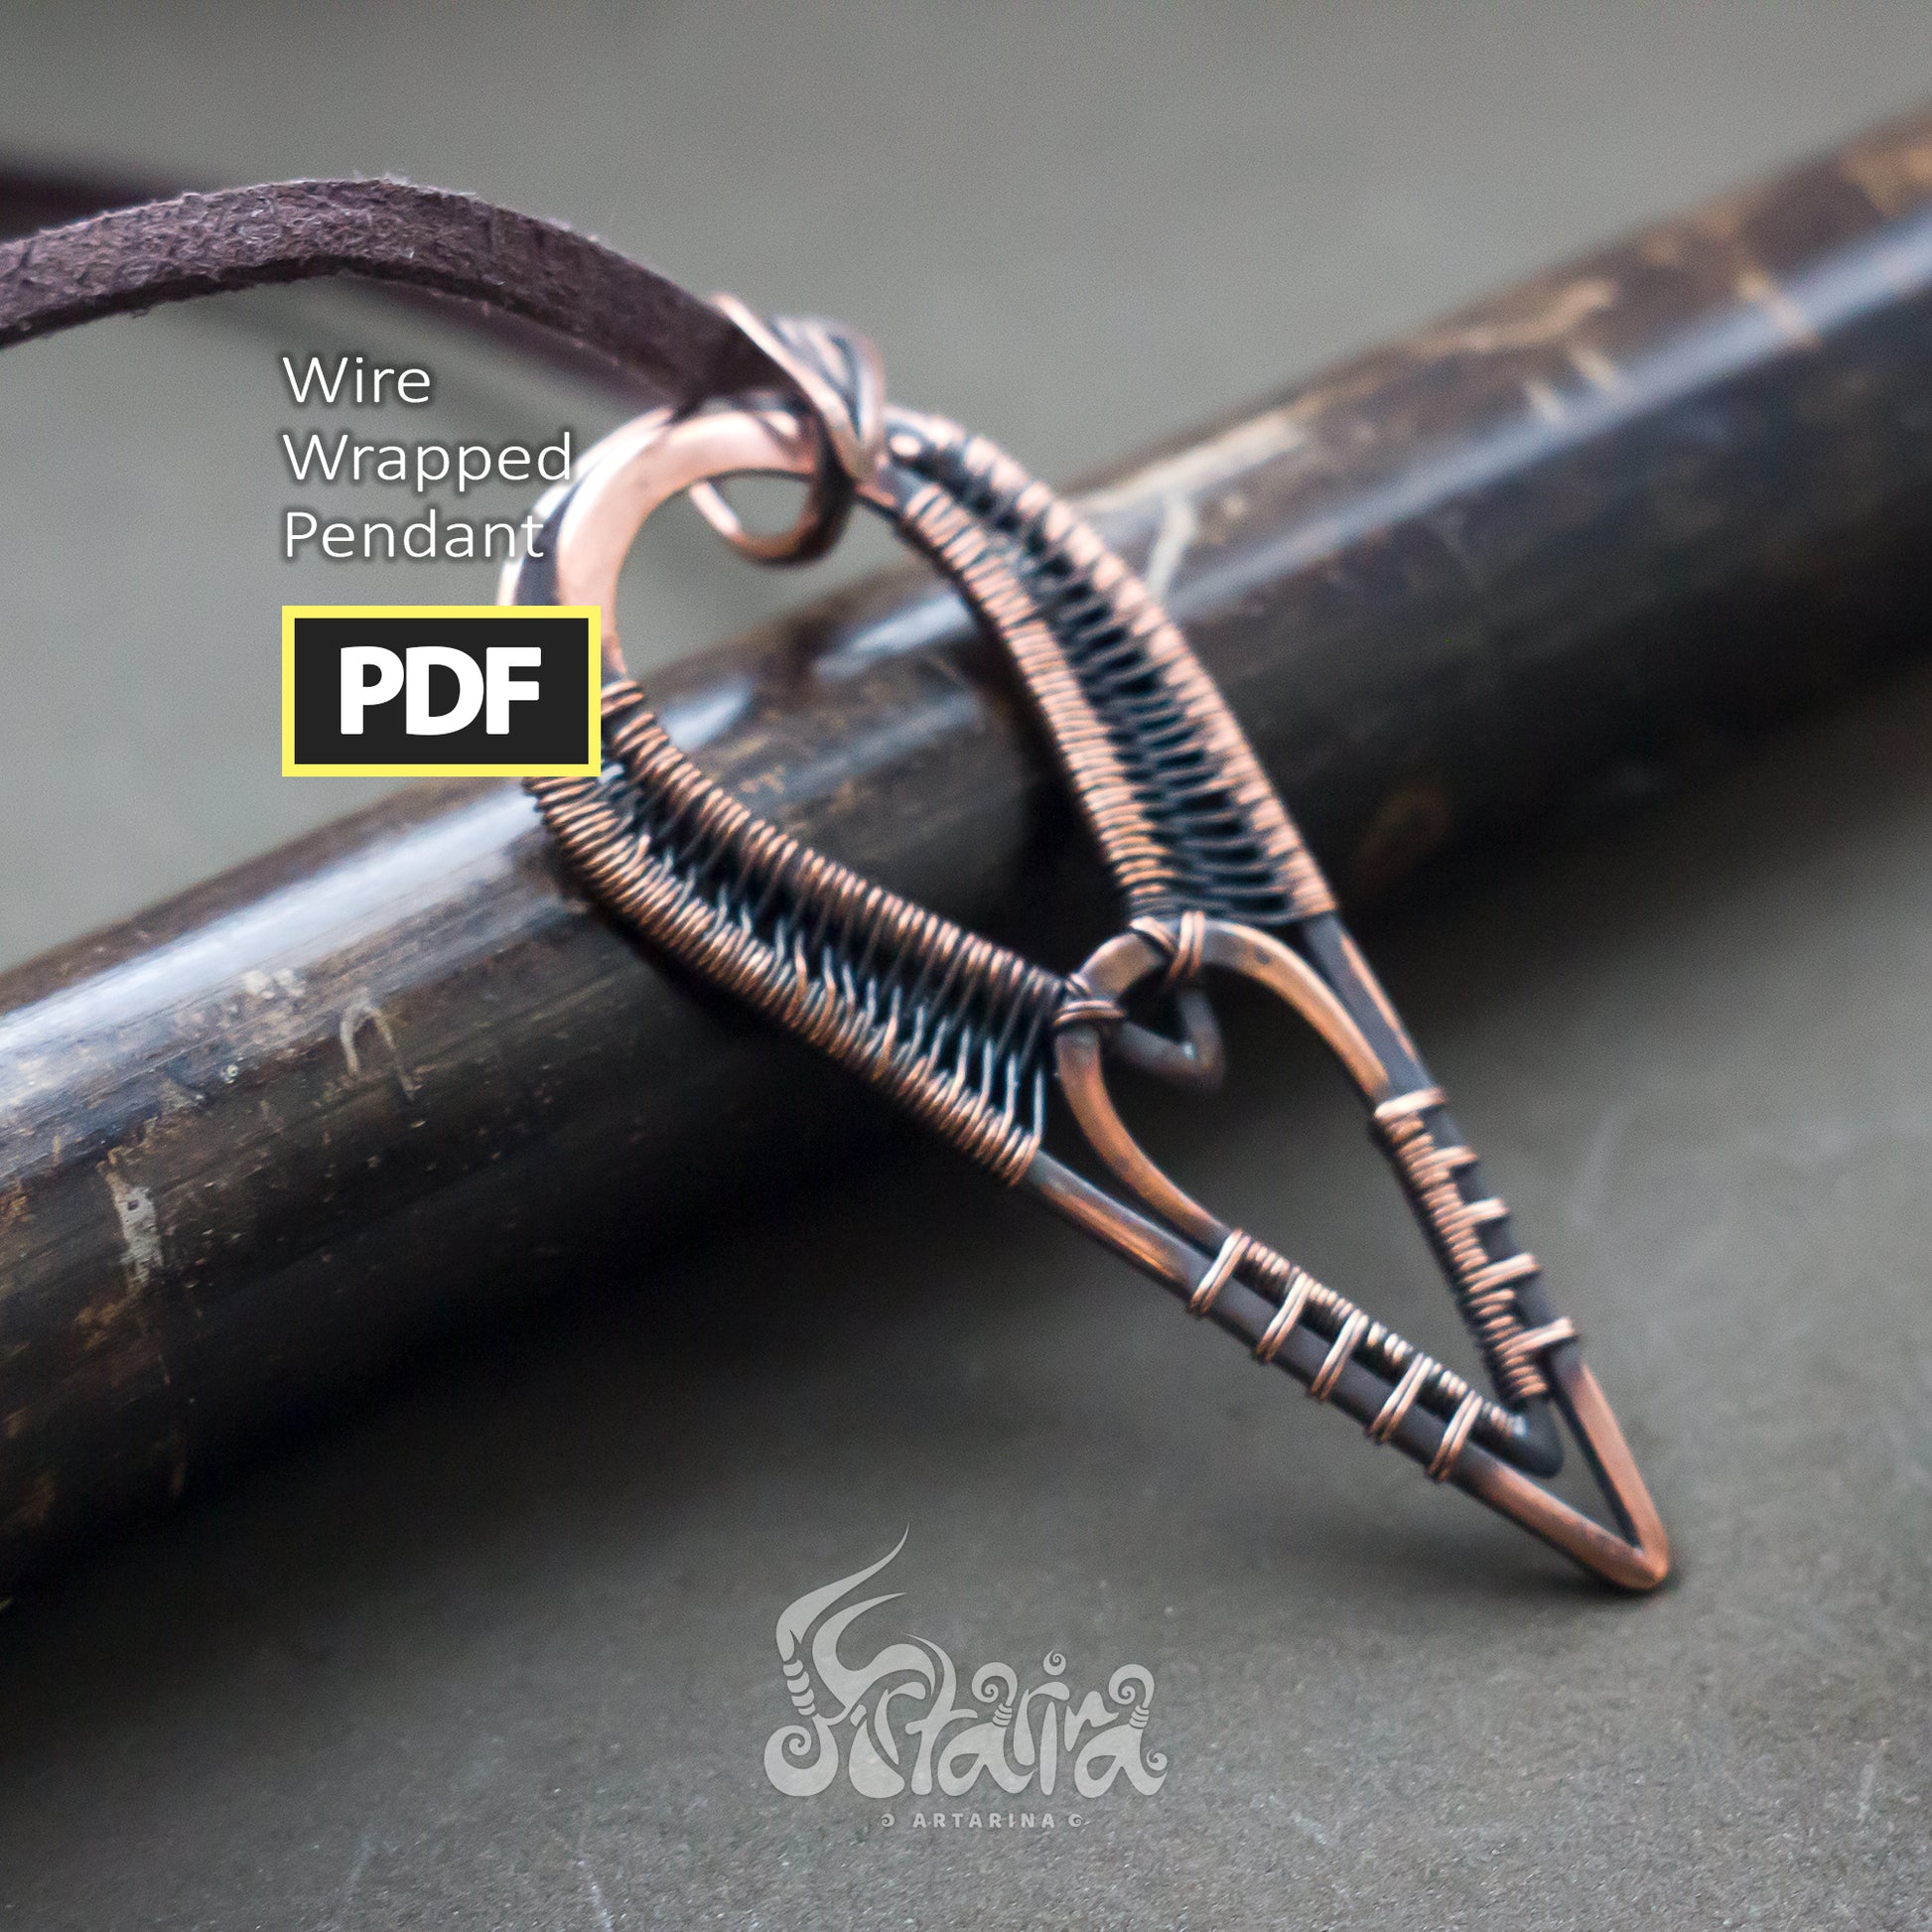 4 Simplest Wire Wrapping Tutorials for great beginner start! pic 5